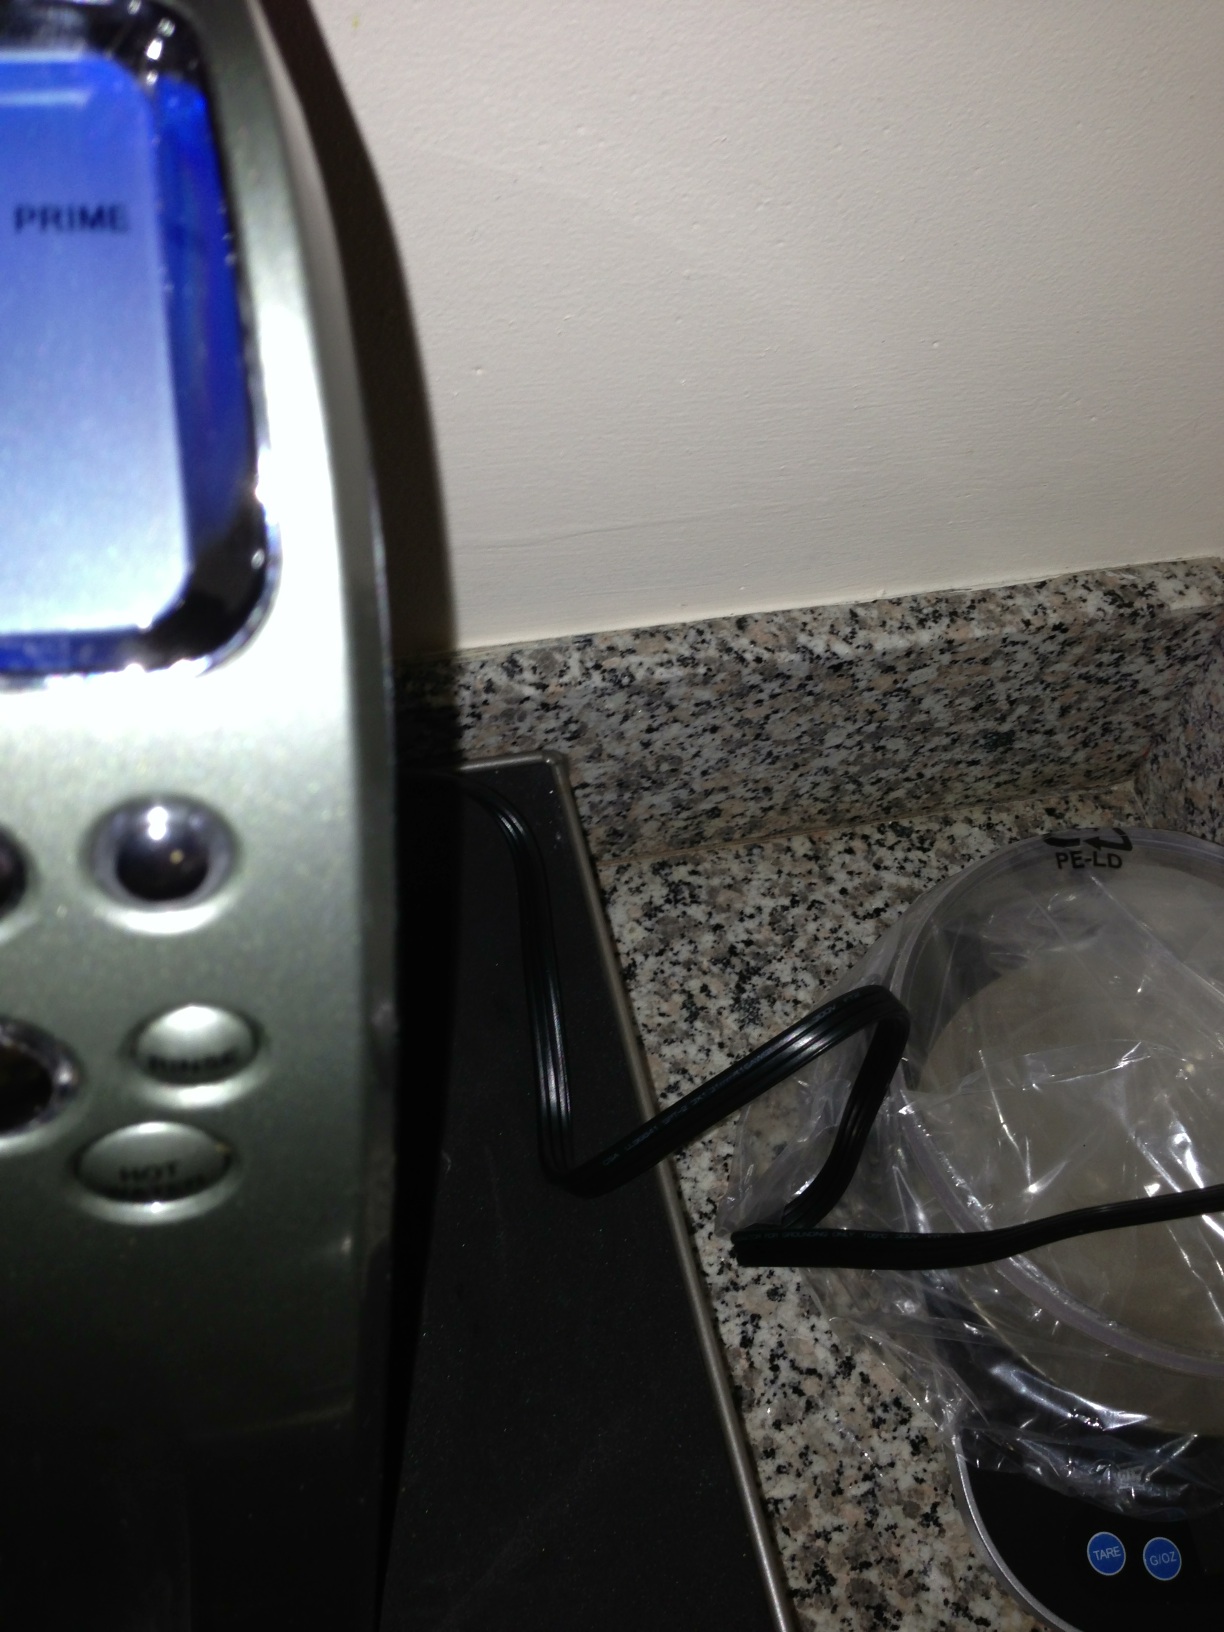 A photo captured by a person who is blind. A computer-generated caption for this photo is: A close up of a sink with a toaster on it.